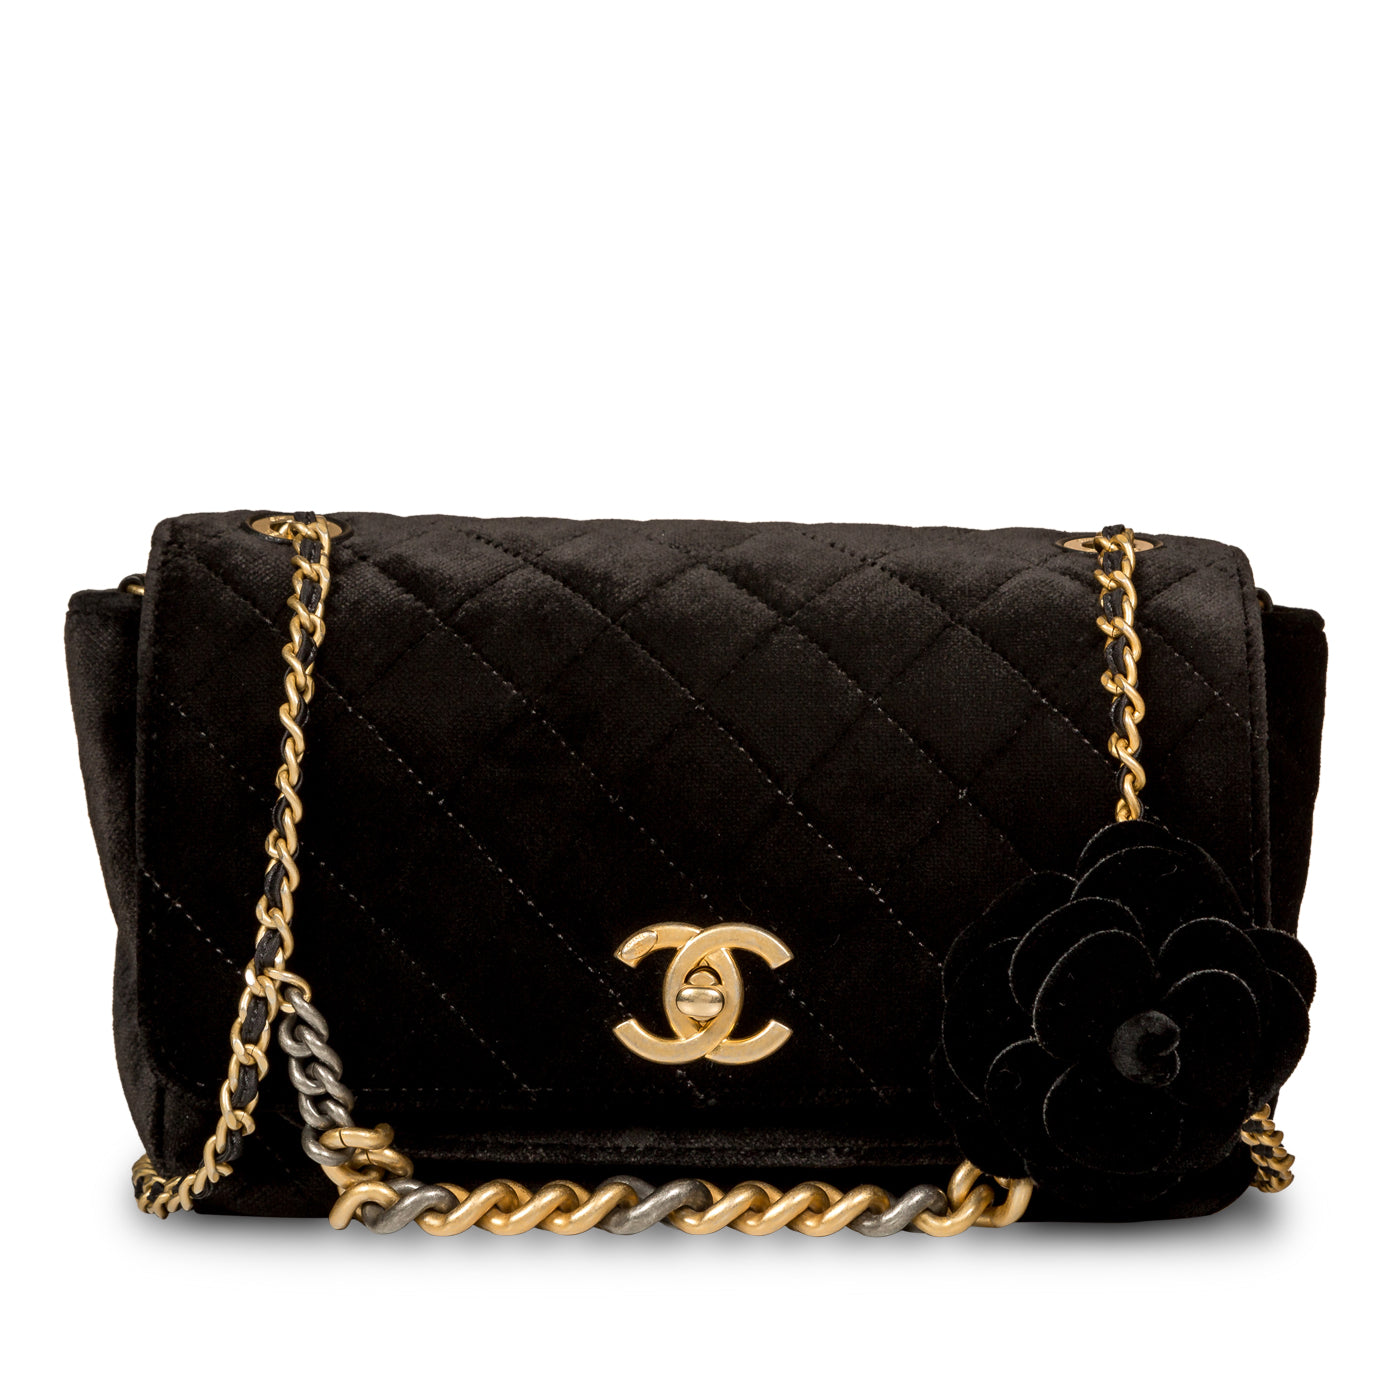 Chanel - Camellia Flower Flap Bag - Black - Brand New Condition